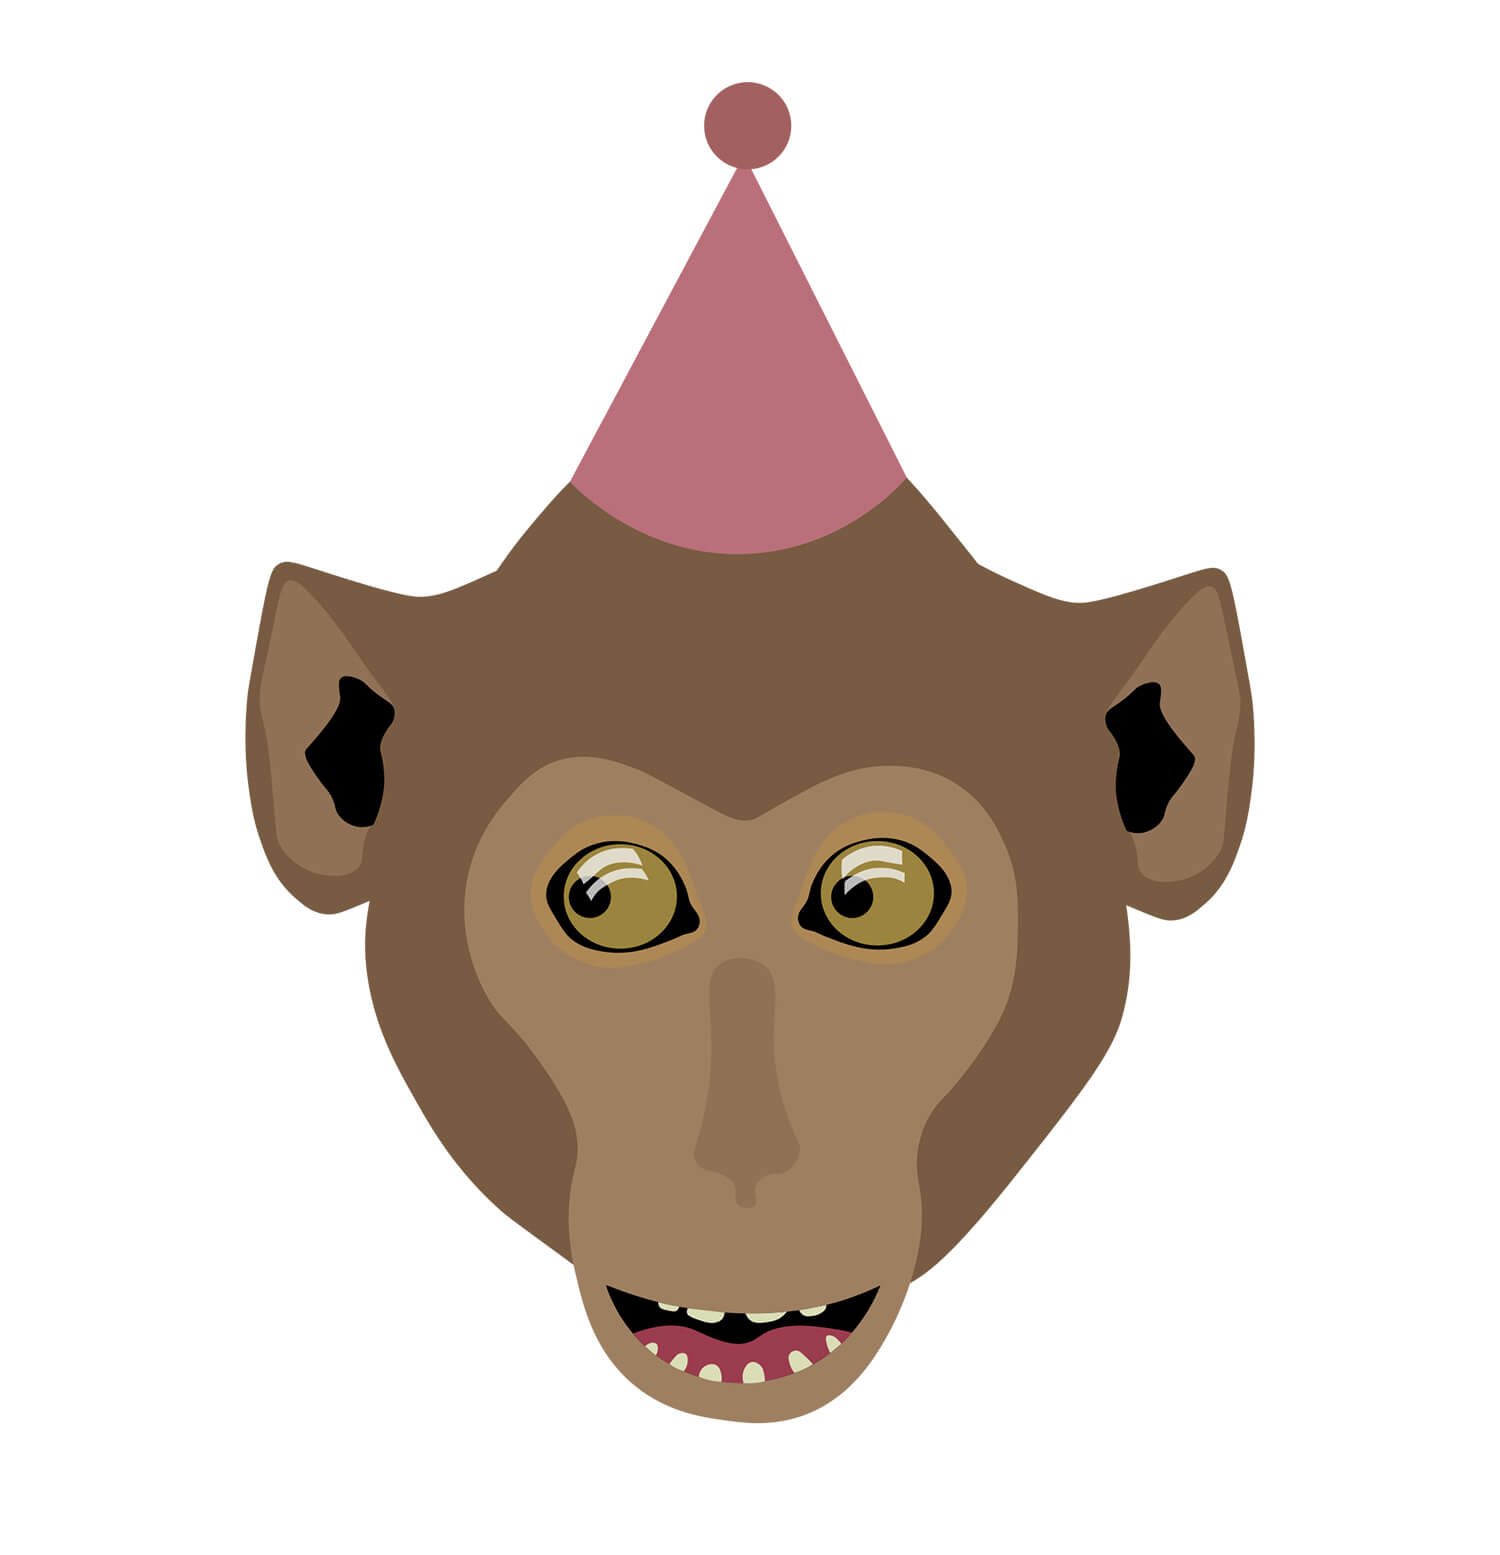 Illustrated monkey with a red hat